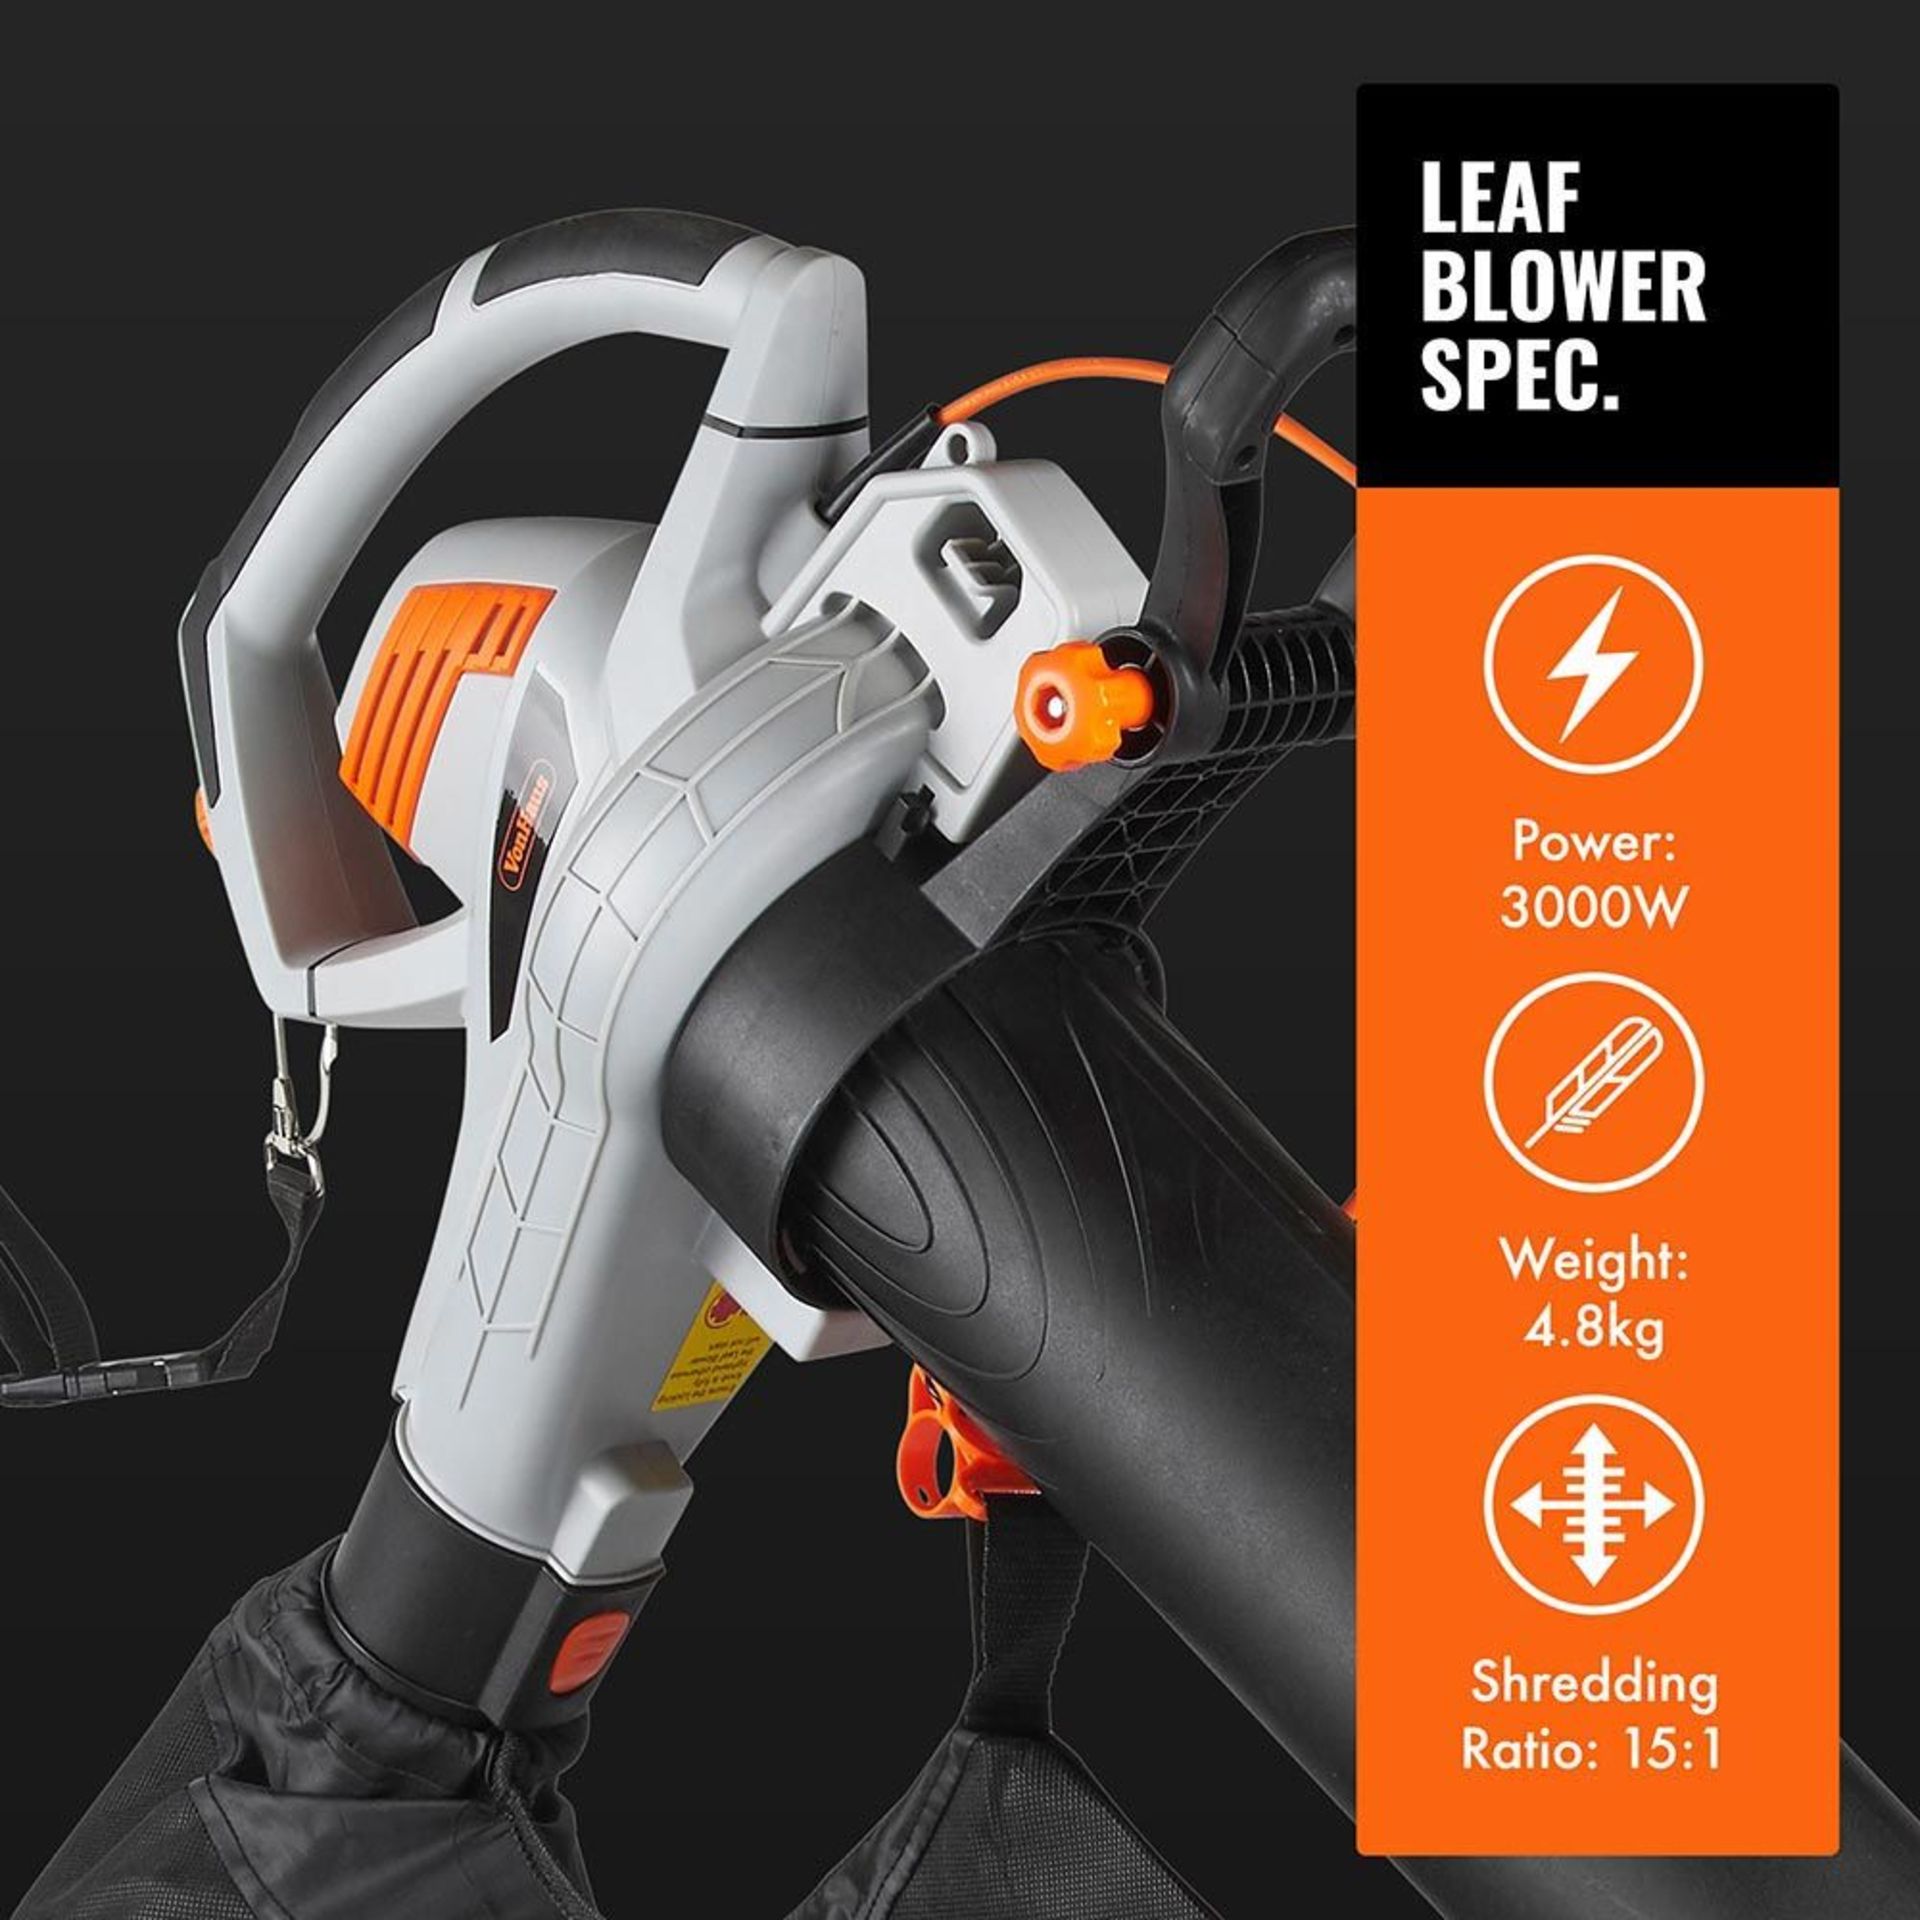 (K1) 3000W 3-in-1 Leaf Blower Powerful 3000W motor blows, vacuums and mulches leaves into mate... - Image 3 of 4